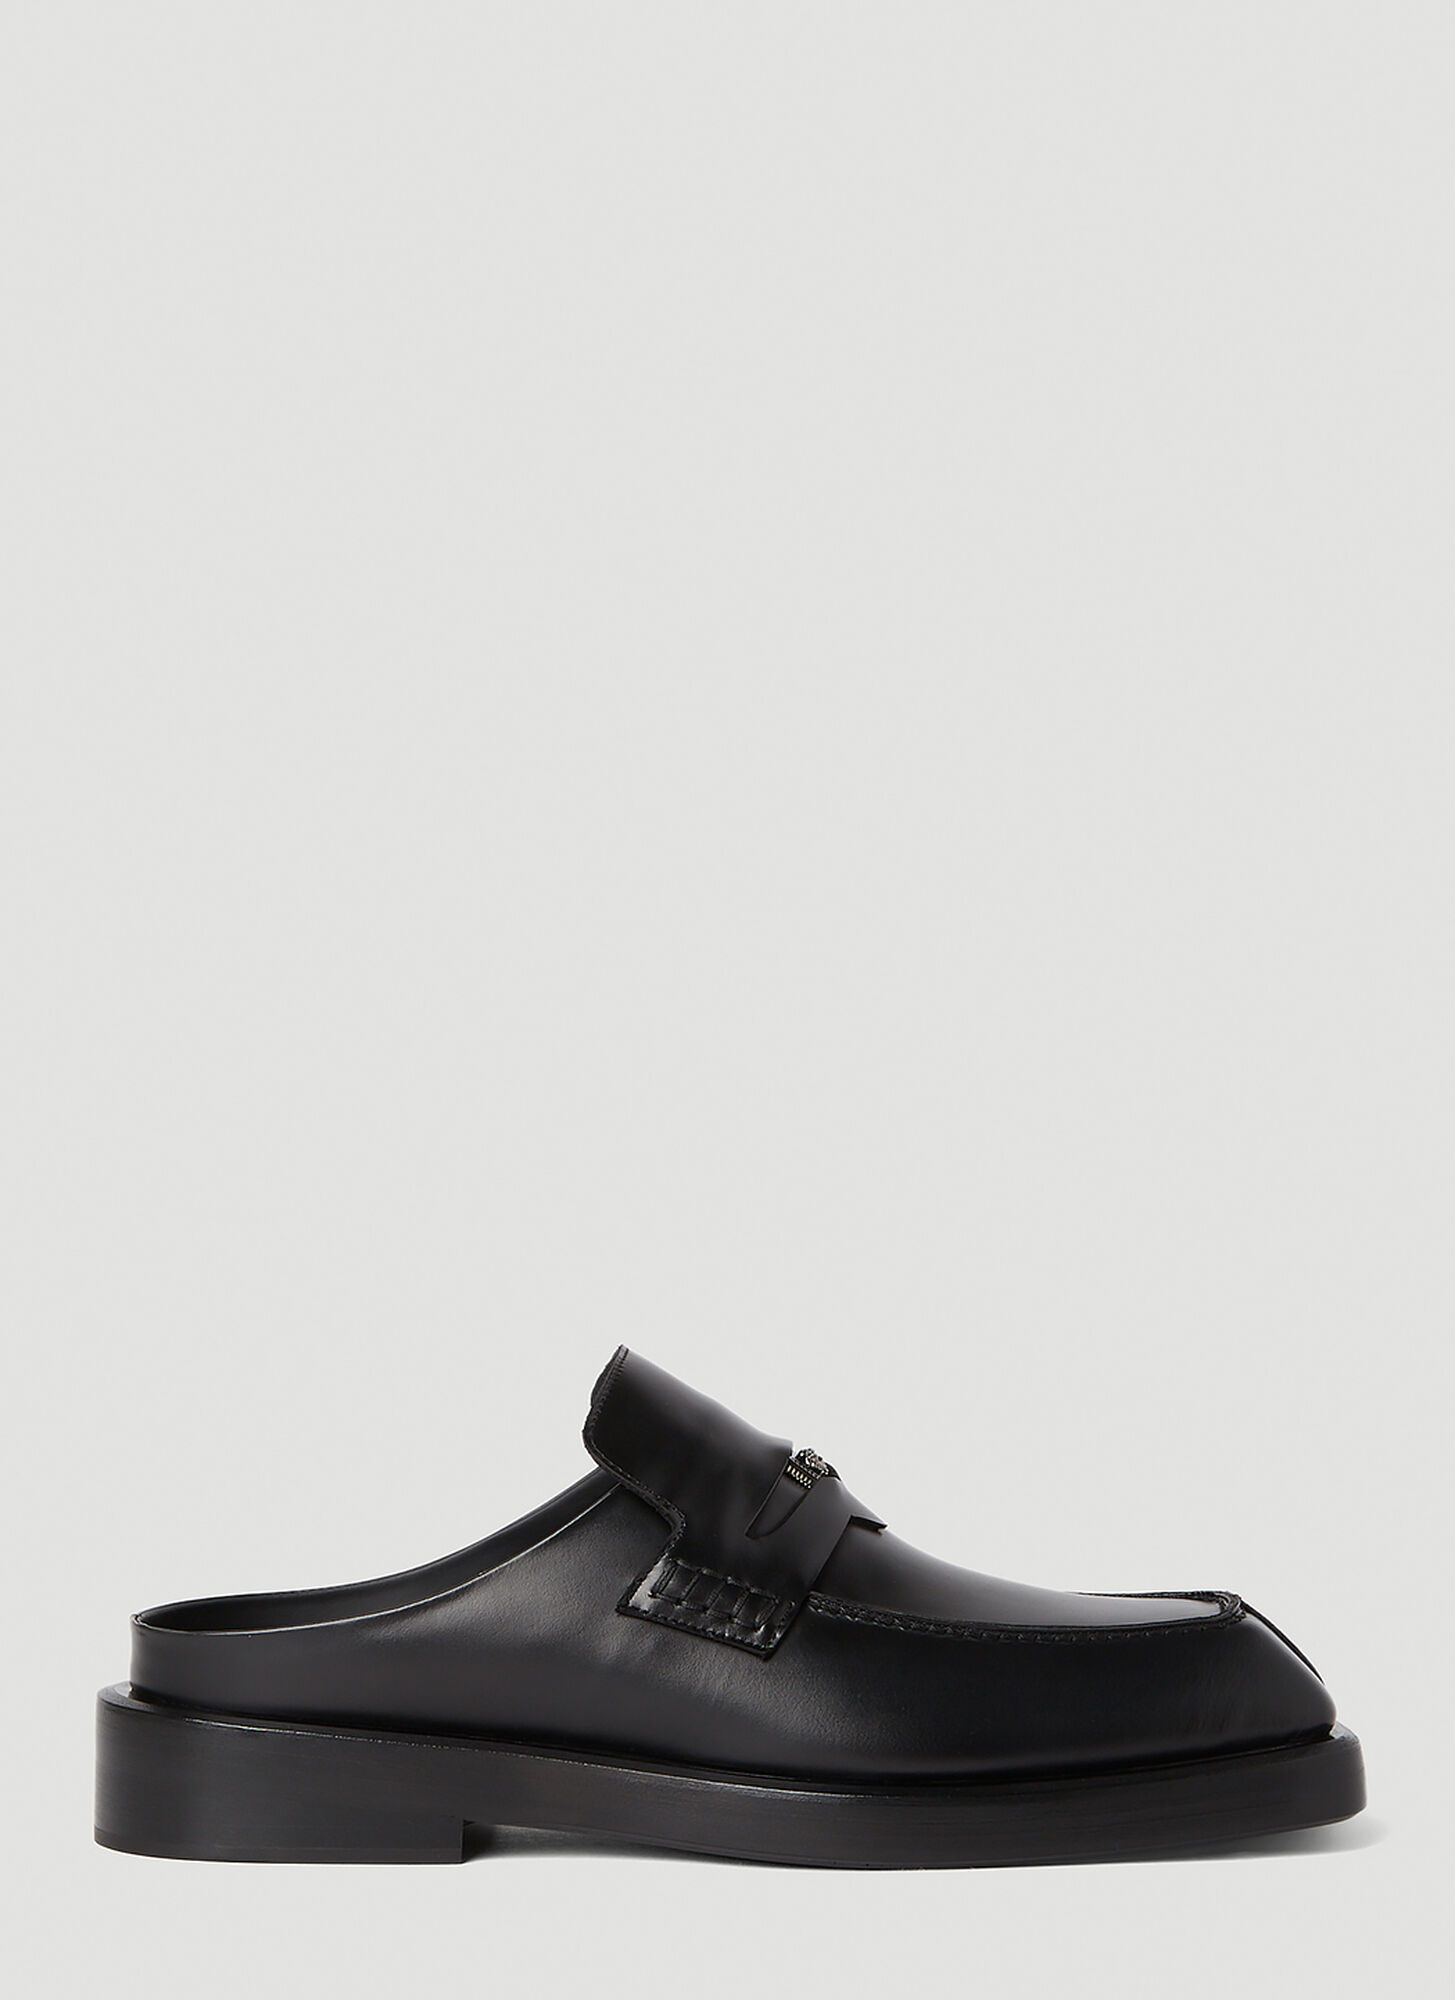 Versace Squared Loafers Male Black